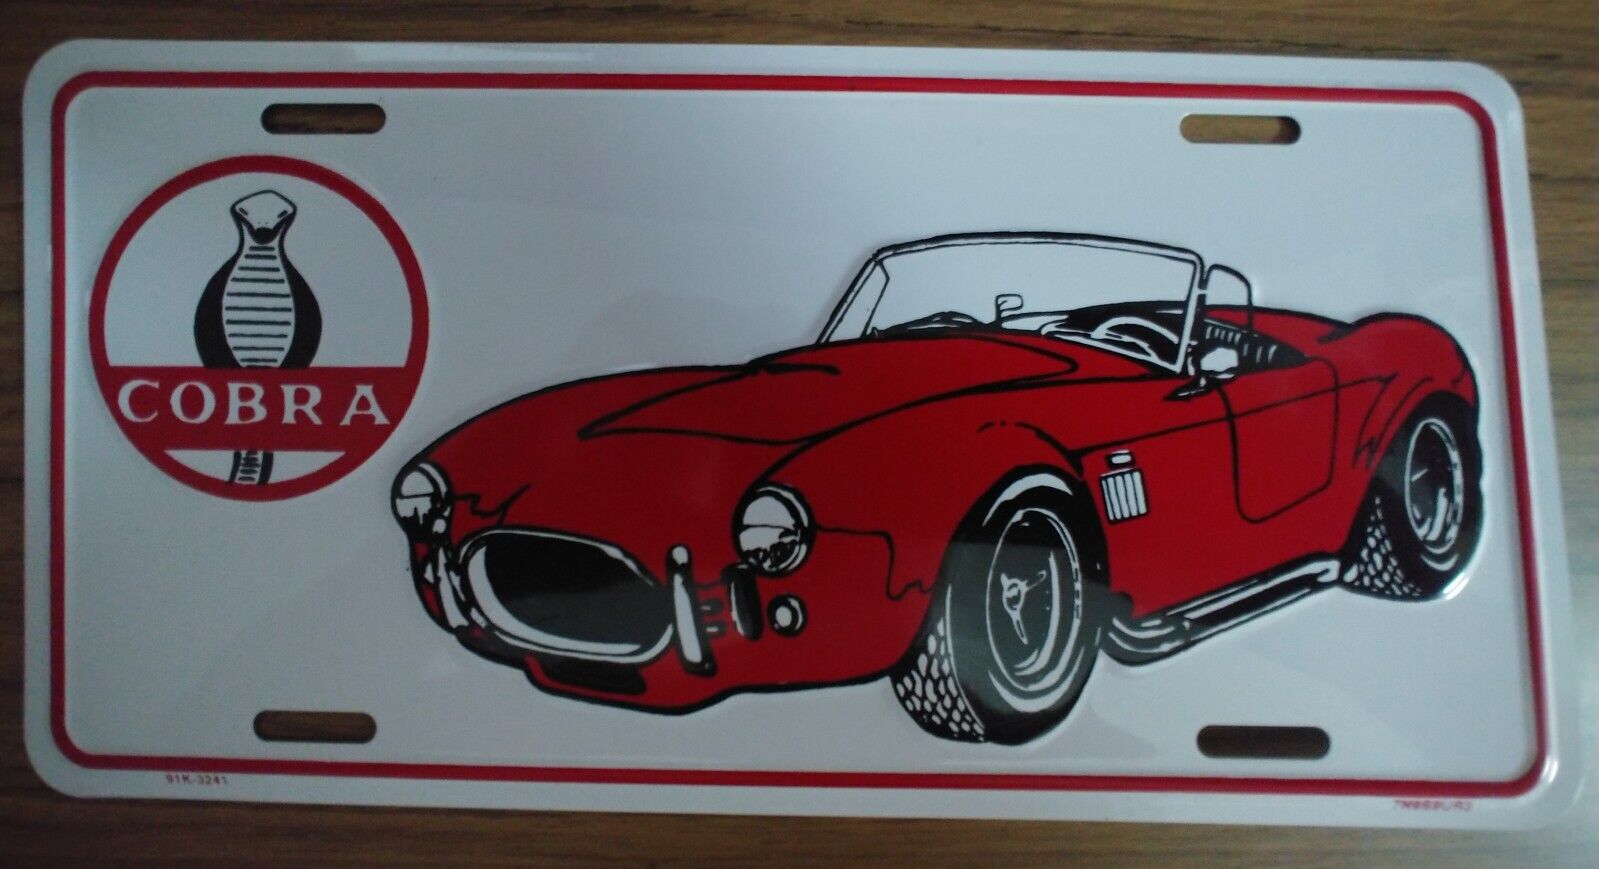 Vintage Cobra Metal / Aluminum novelty license plate embossed - Collectible